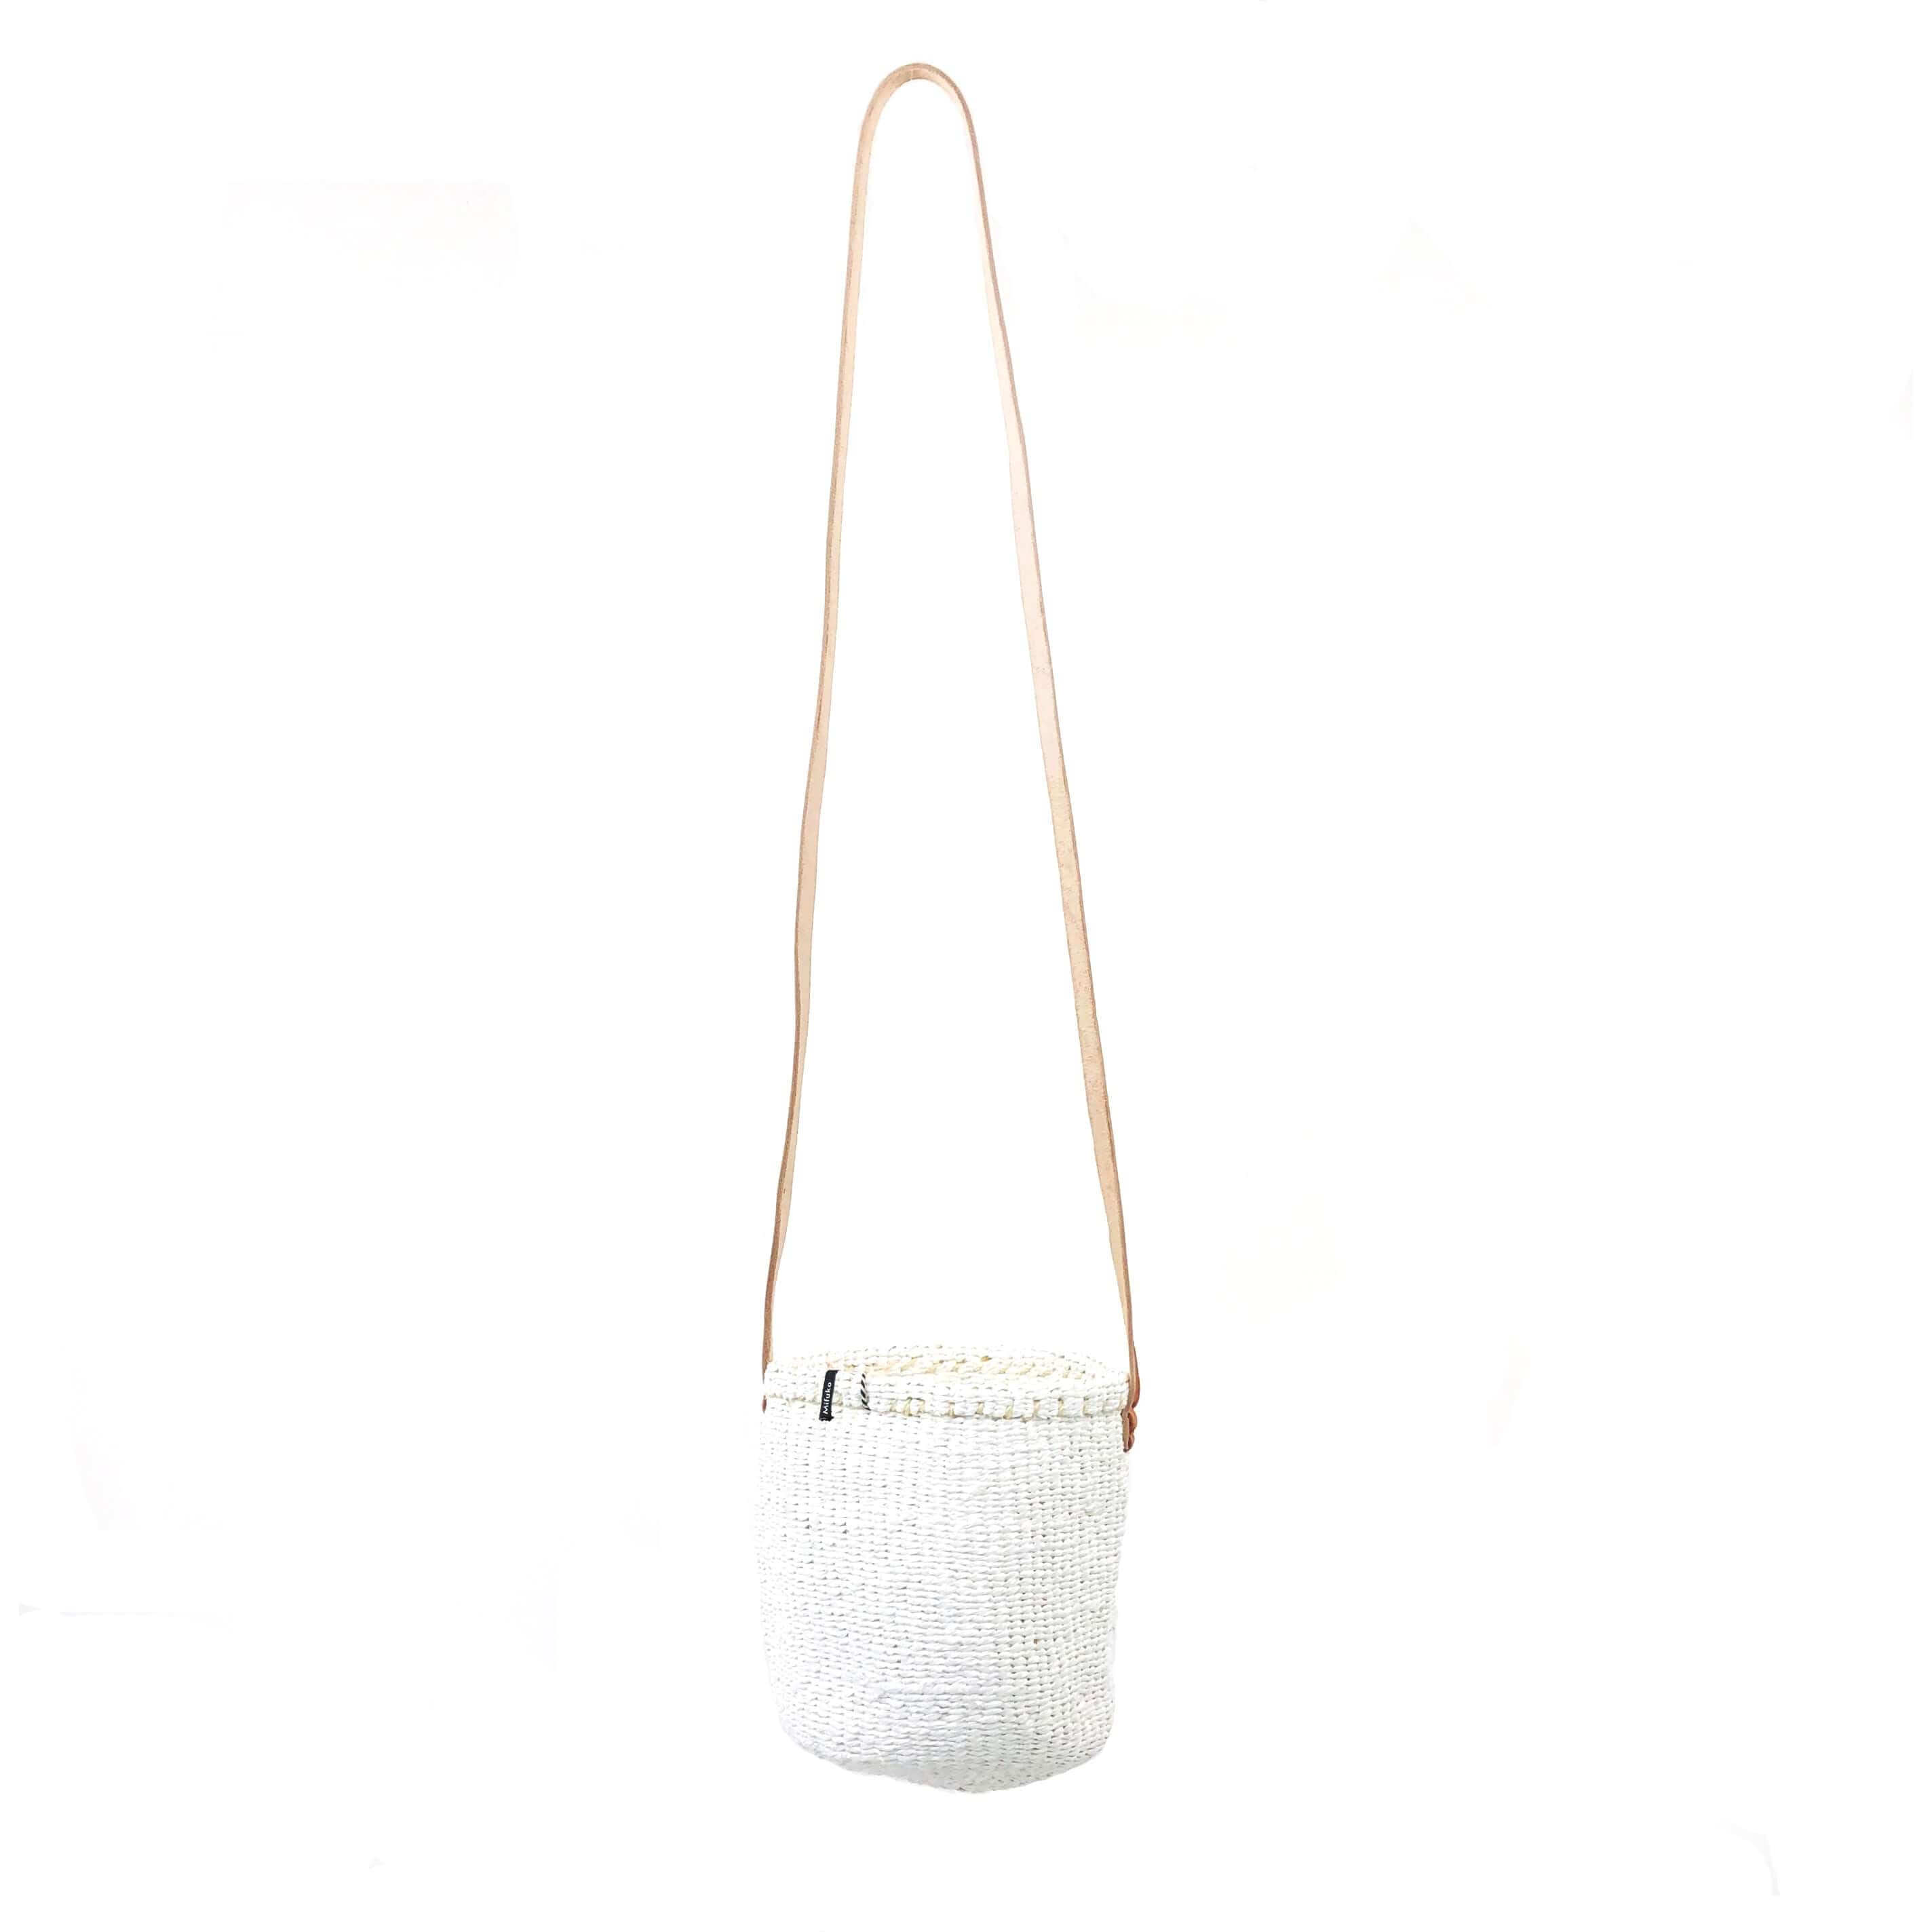 Mifuko Partly recycled plastic and sisal Basket with long handle XS Kiondo hanging basket | White XS